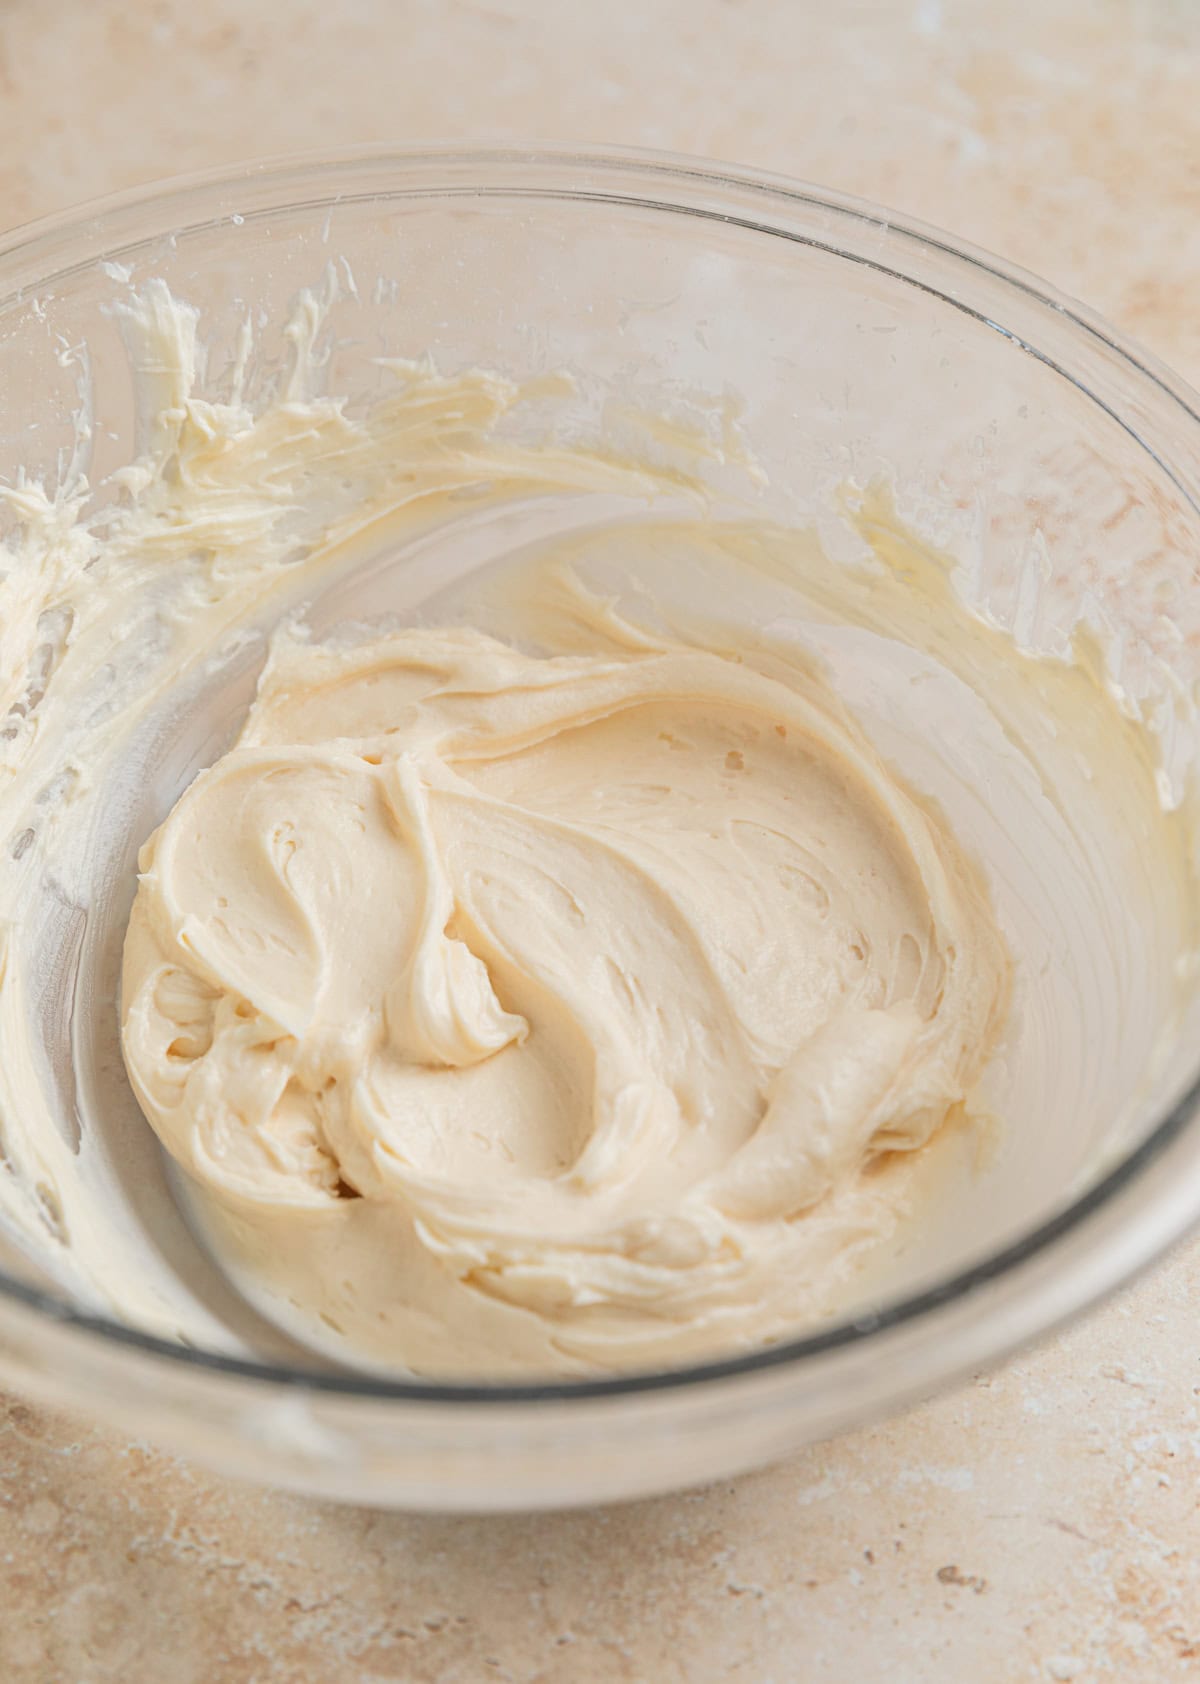 Cream cheese can powdered sugar creamed together in glass mixing bowl.